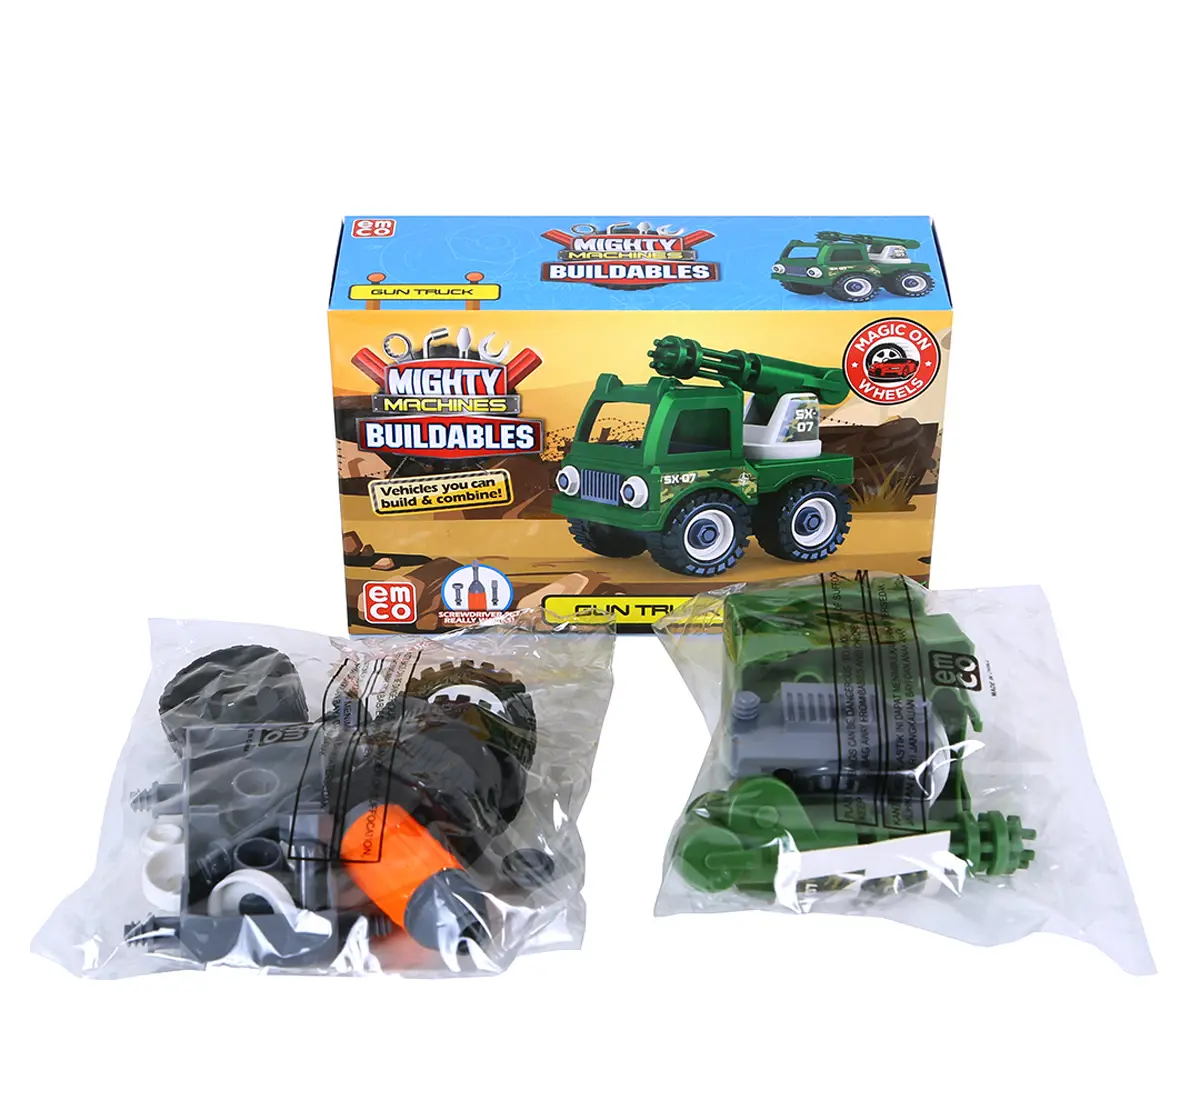 Mighty Machines Gun Truck Construction Vechile for kids 3Y+, Multicolour